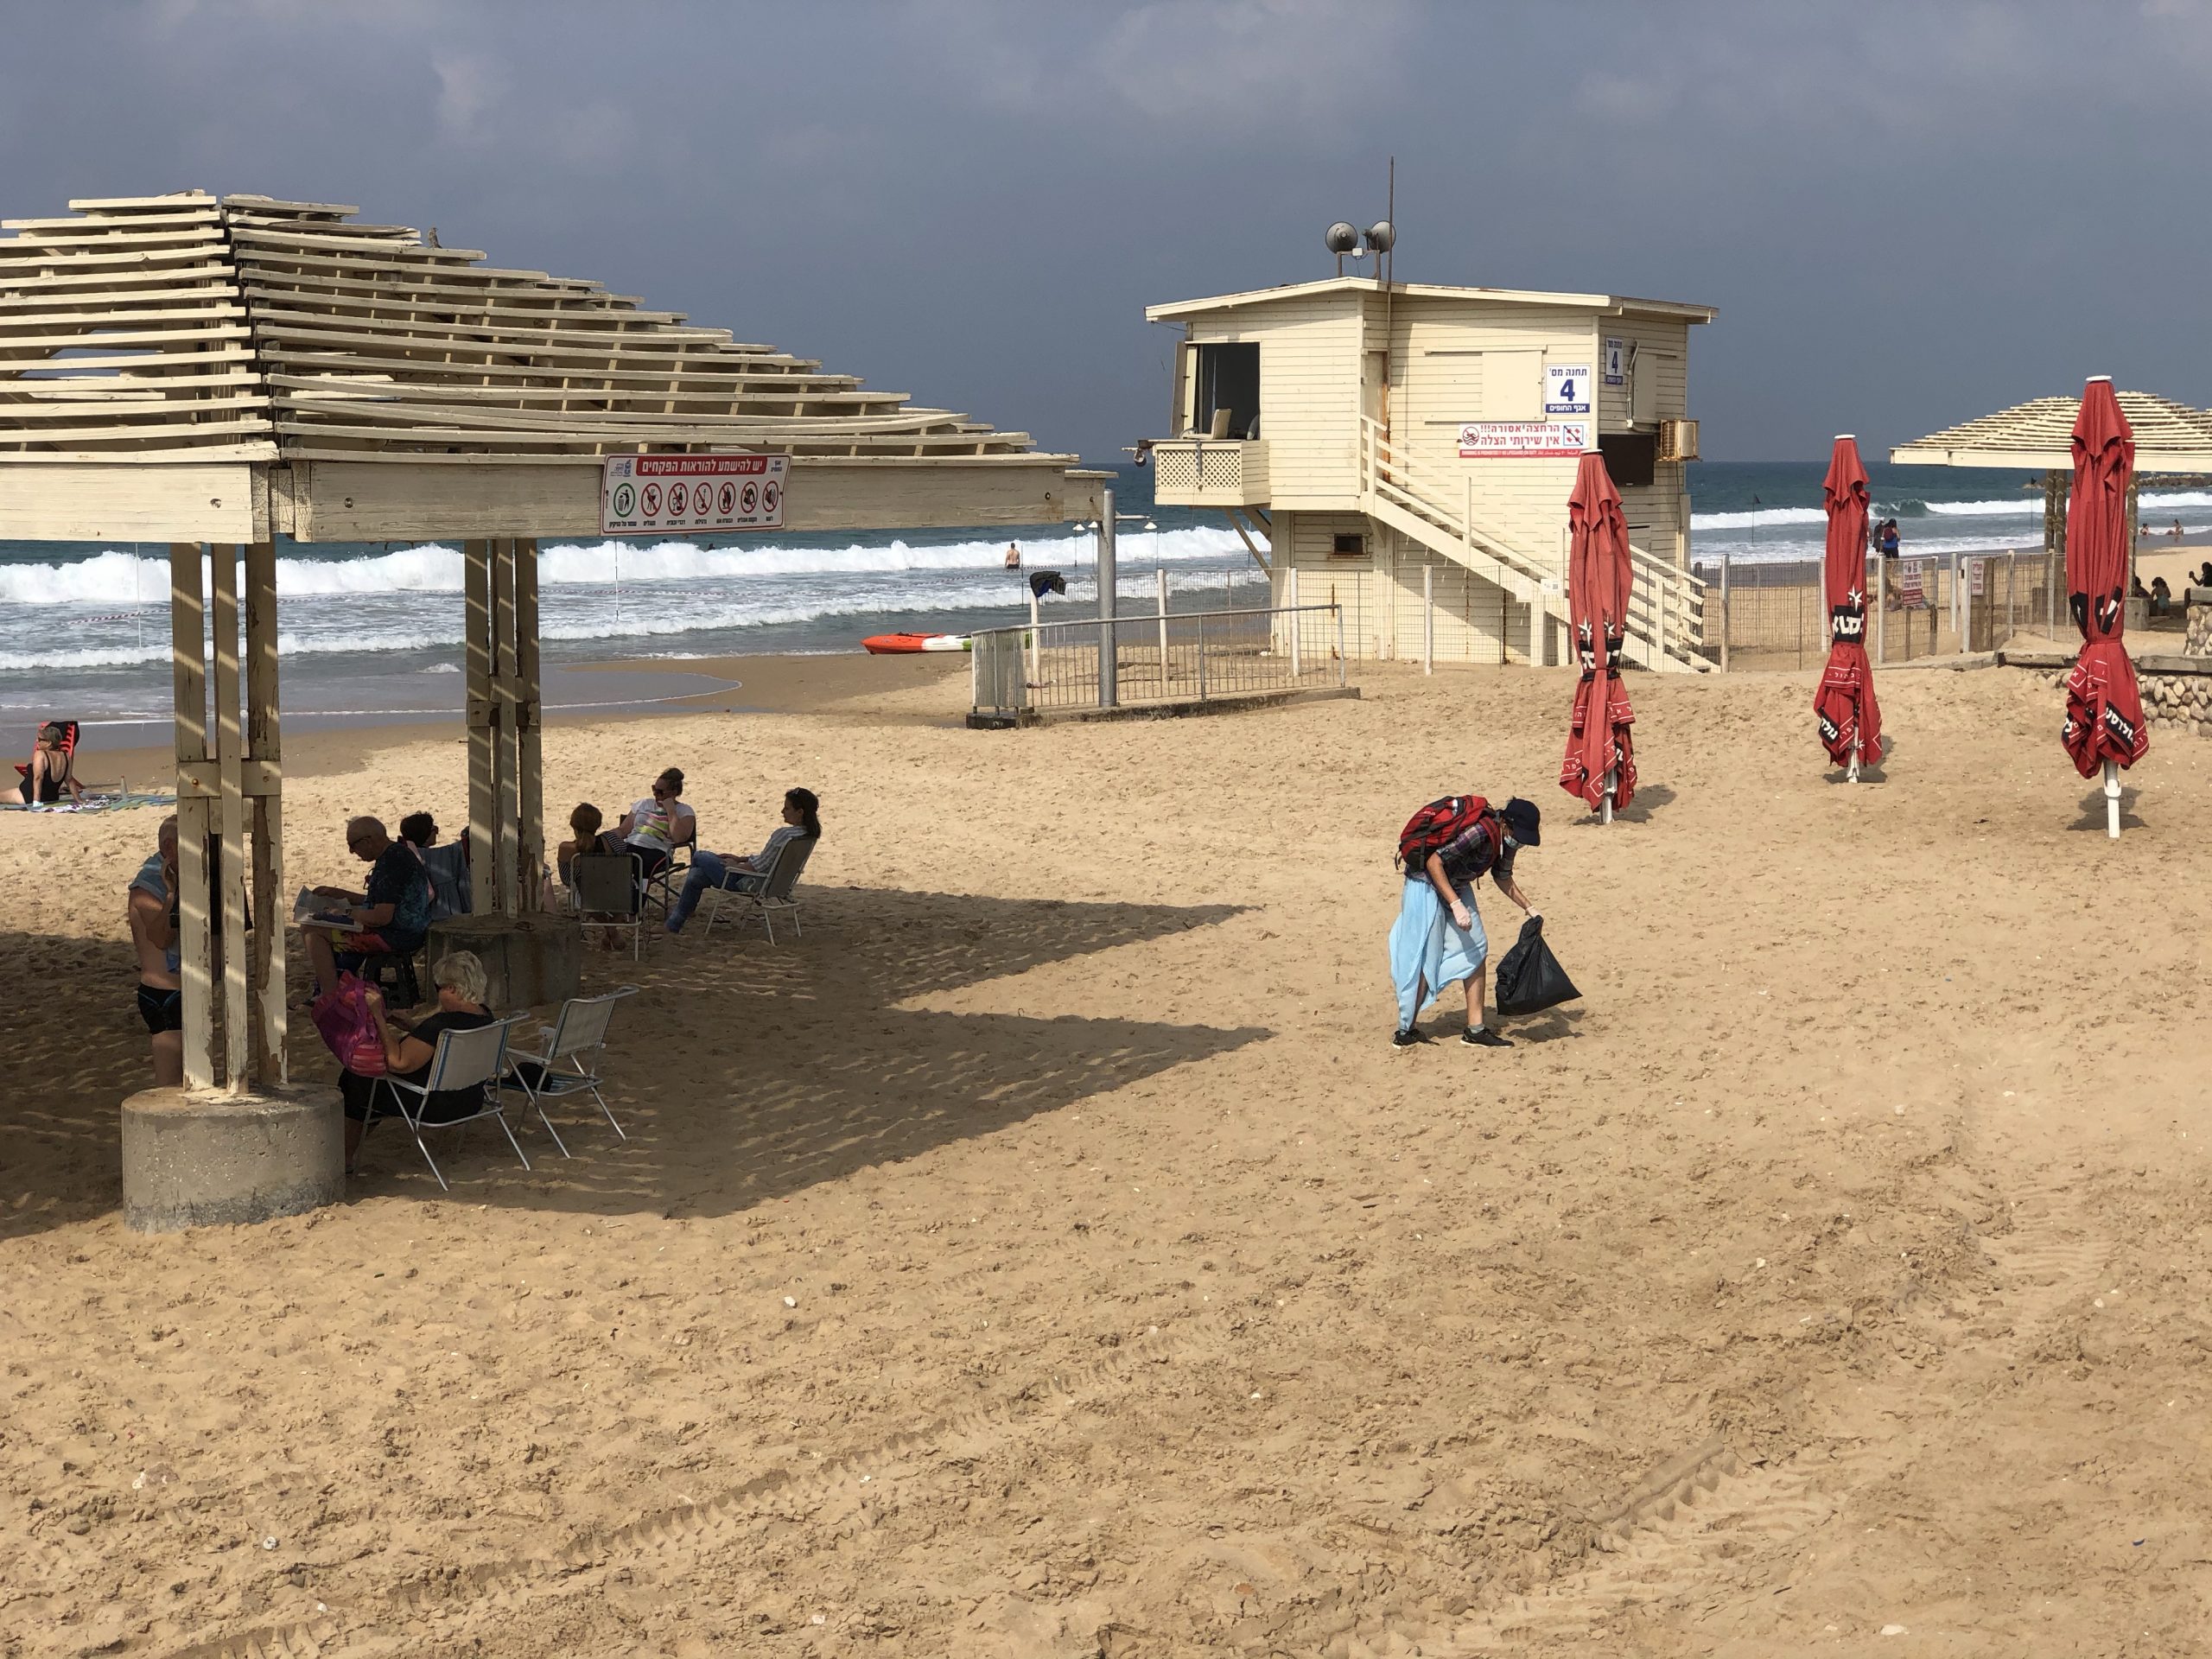 World's Biggest Beach Clean-up In Israel